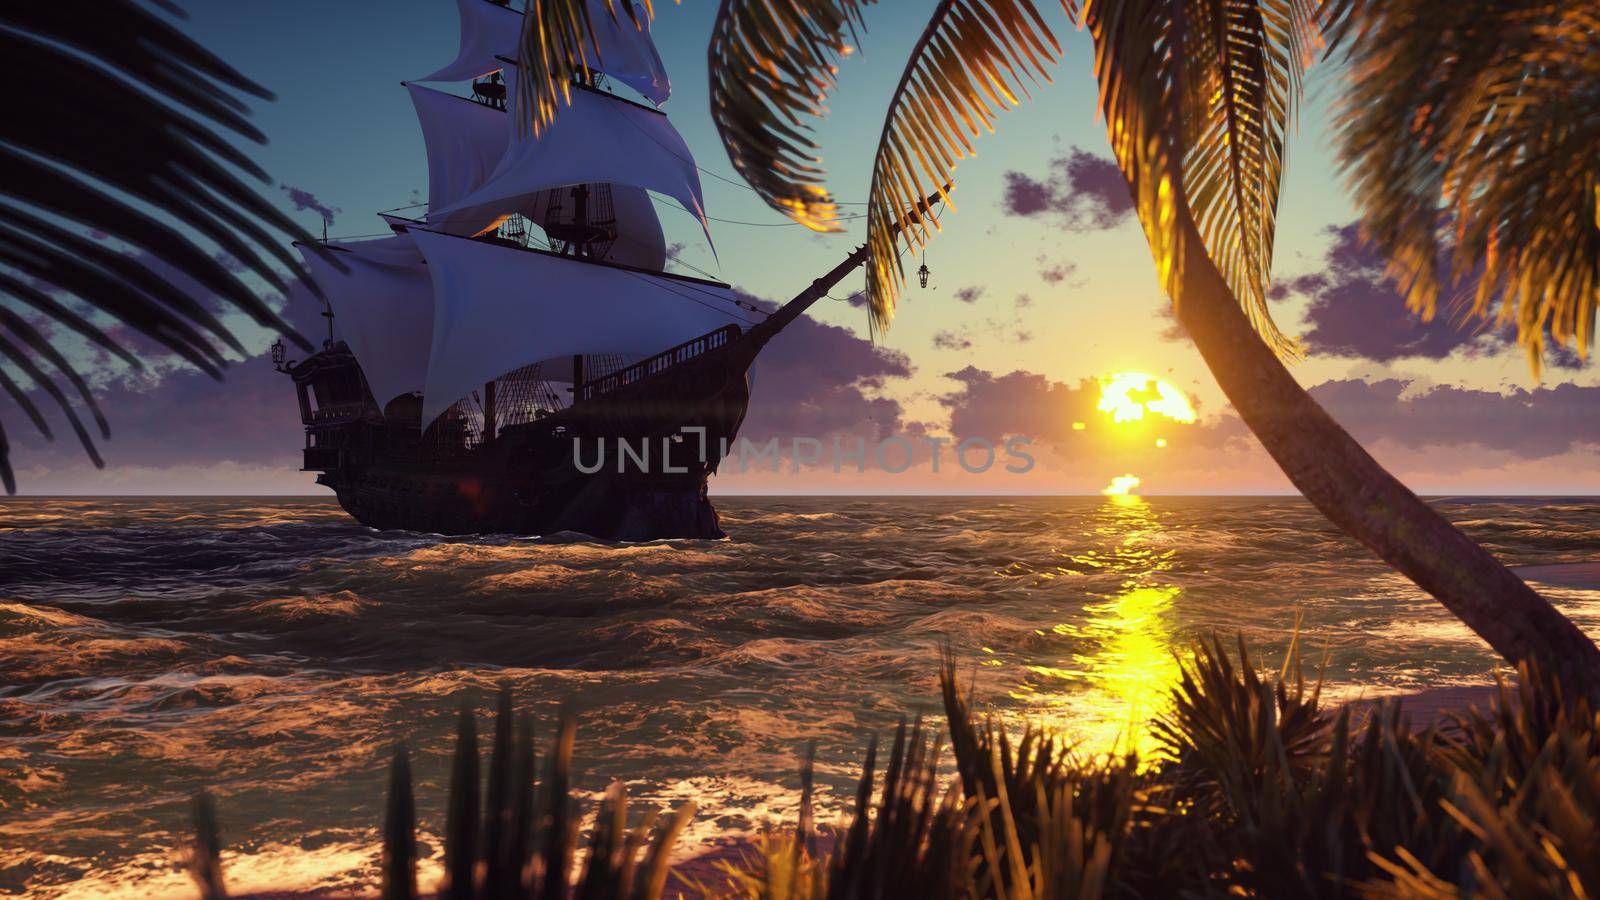 A large medieval ship at sea at sunset. An ancient medieval ship moored near a desert tropical island. 3D Rendering by designprojects